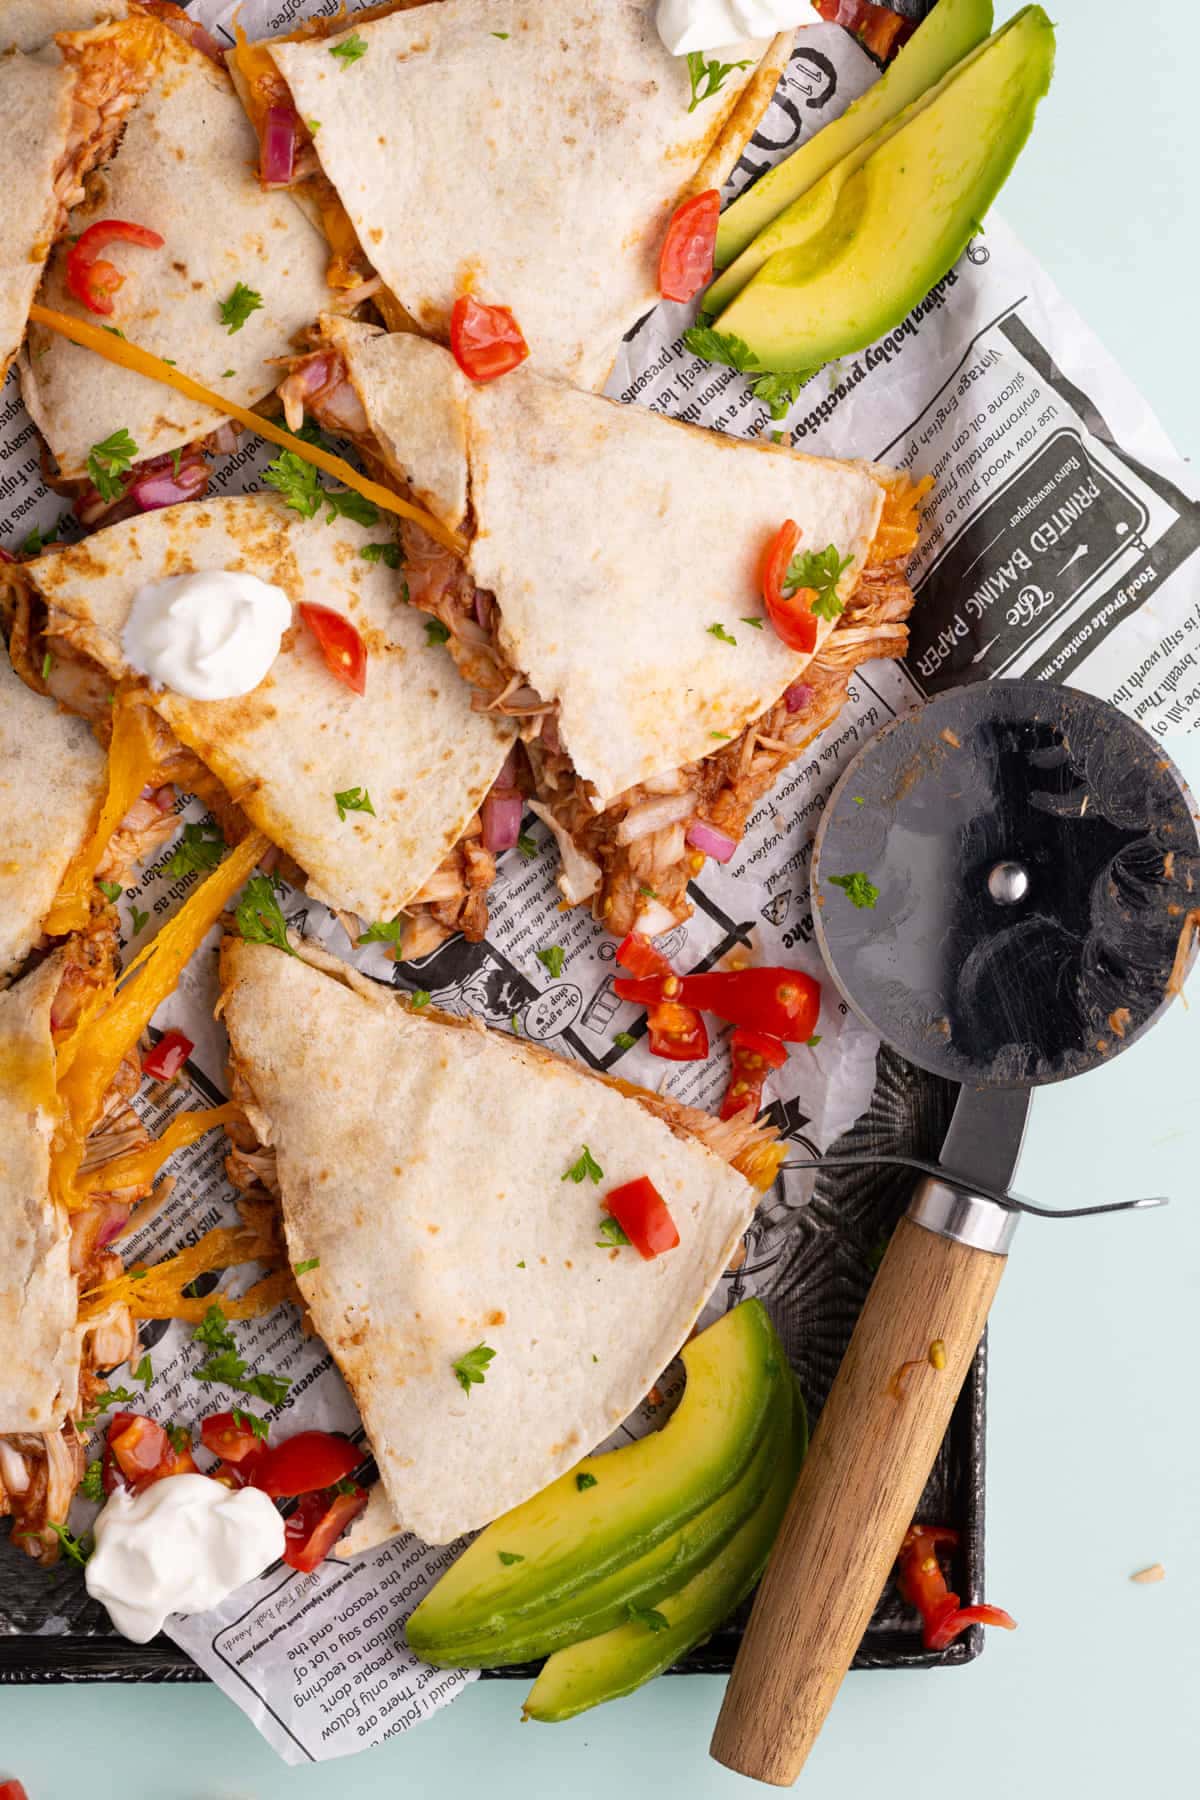 BBQ Jackfruit Quesadilla sliced with a pizza cutter